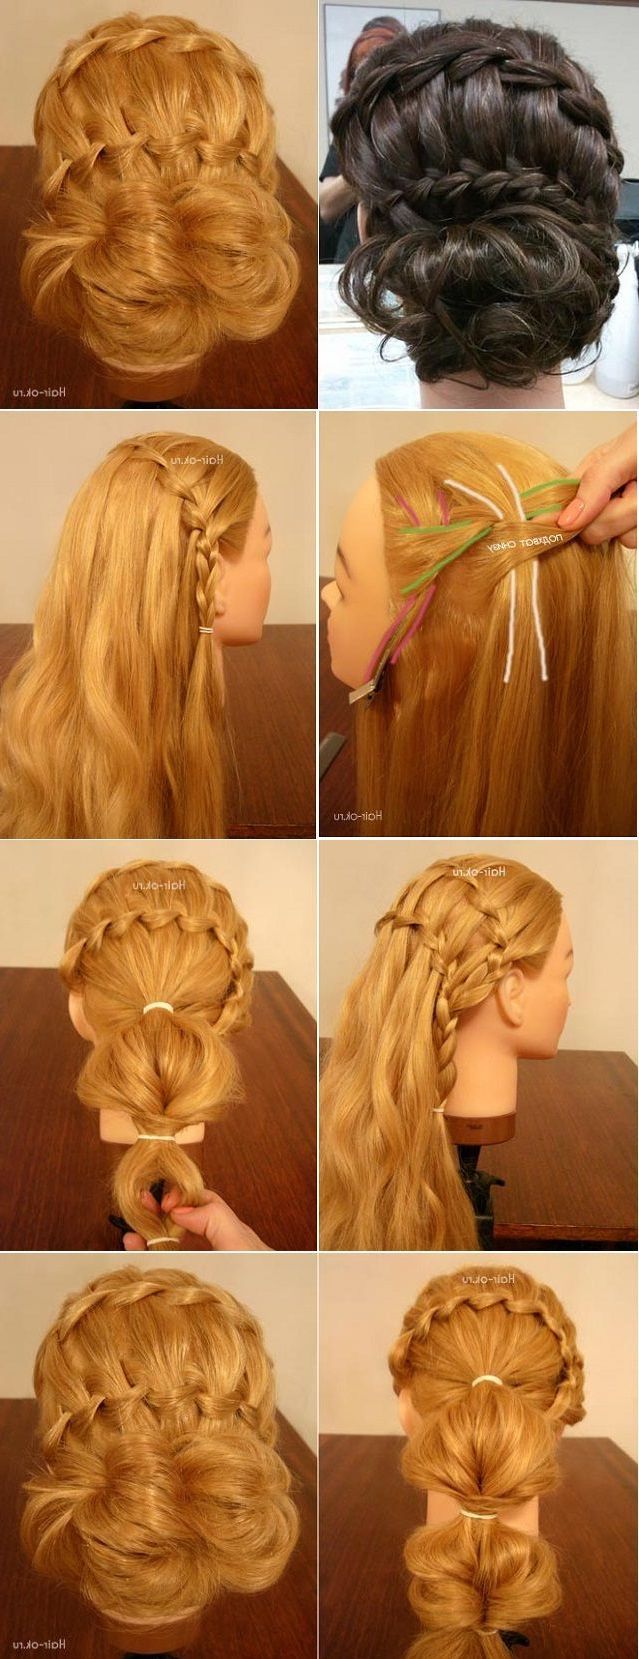 Most Recently Released The Waterfall Braid Hairstyles Inside The Double Waterfall French Braid Hairstyle – Diy (View 20 of 20)